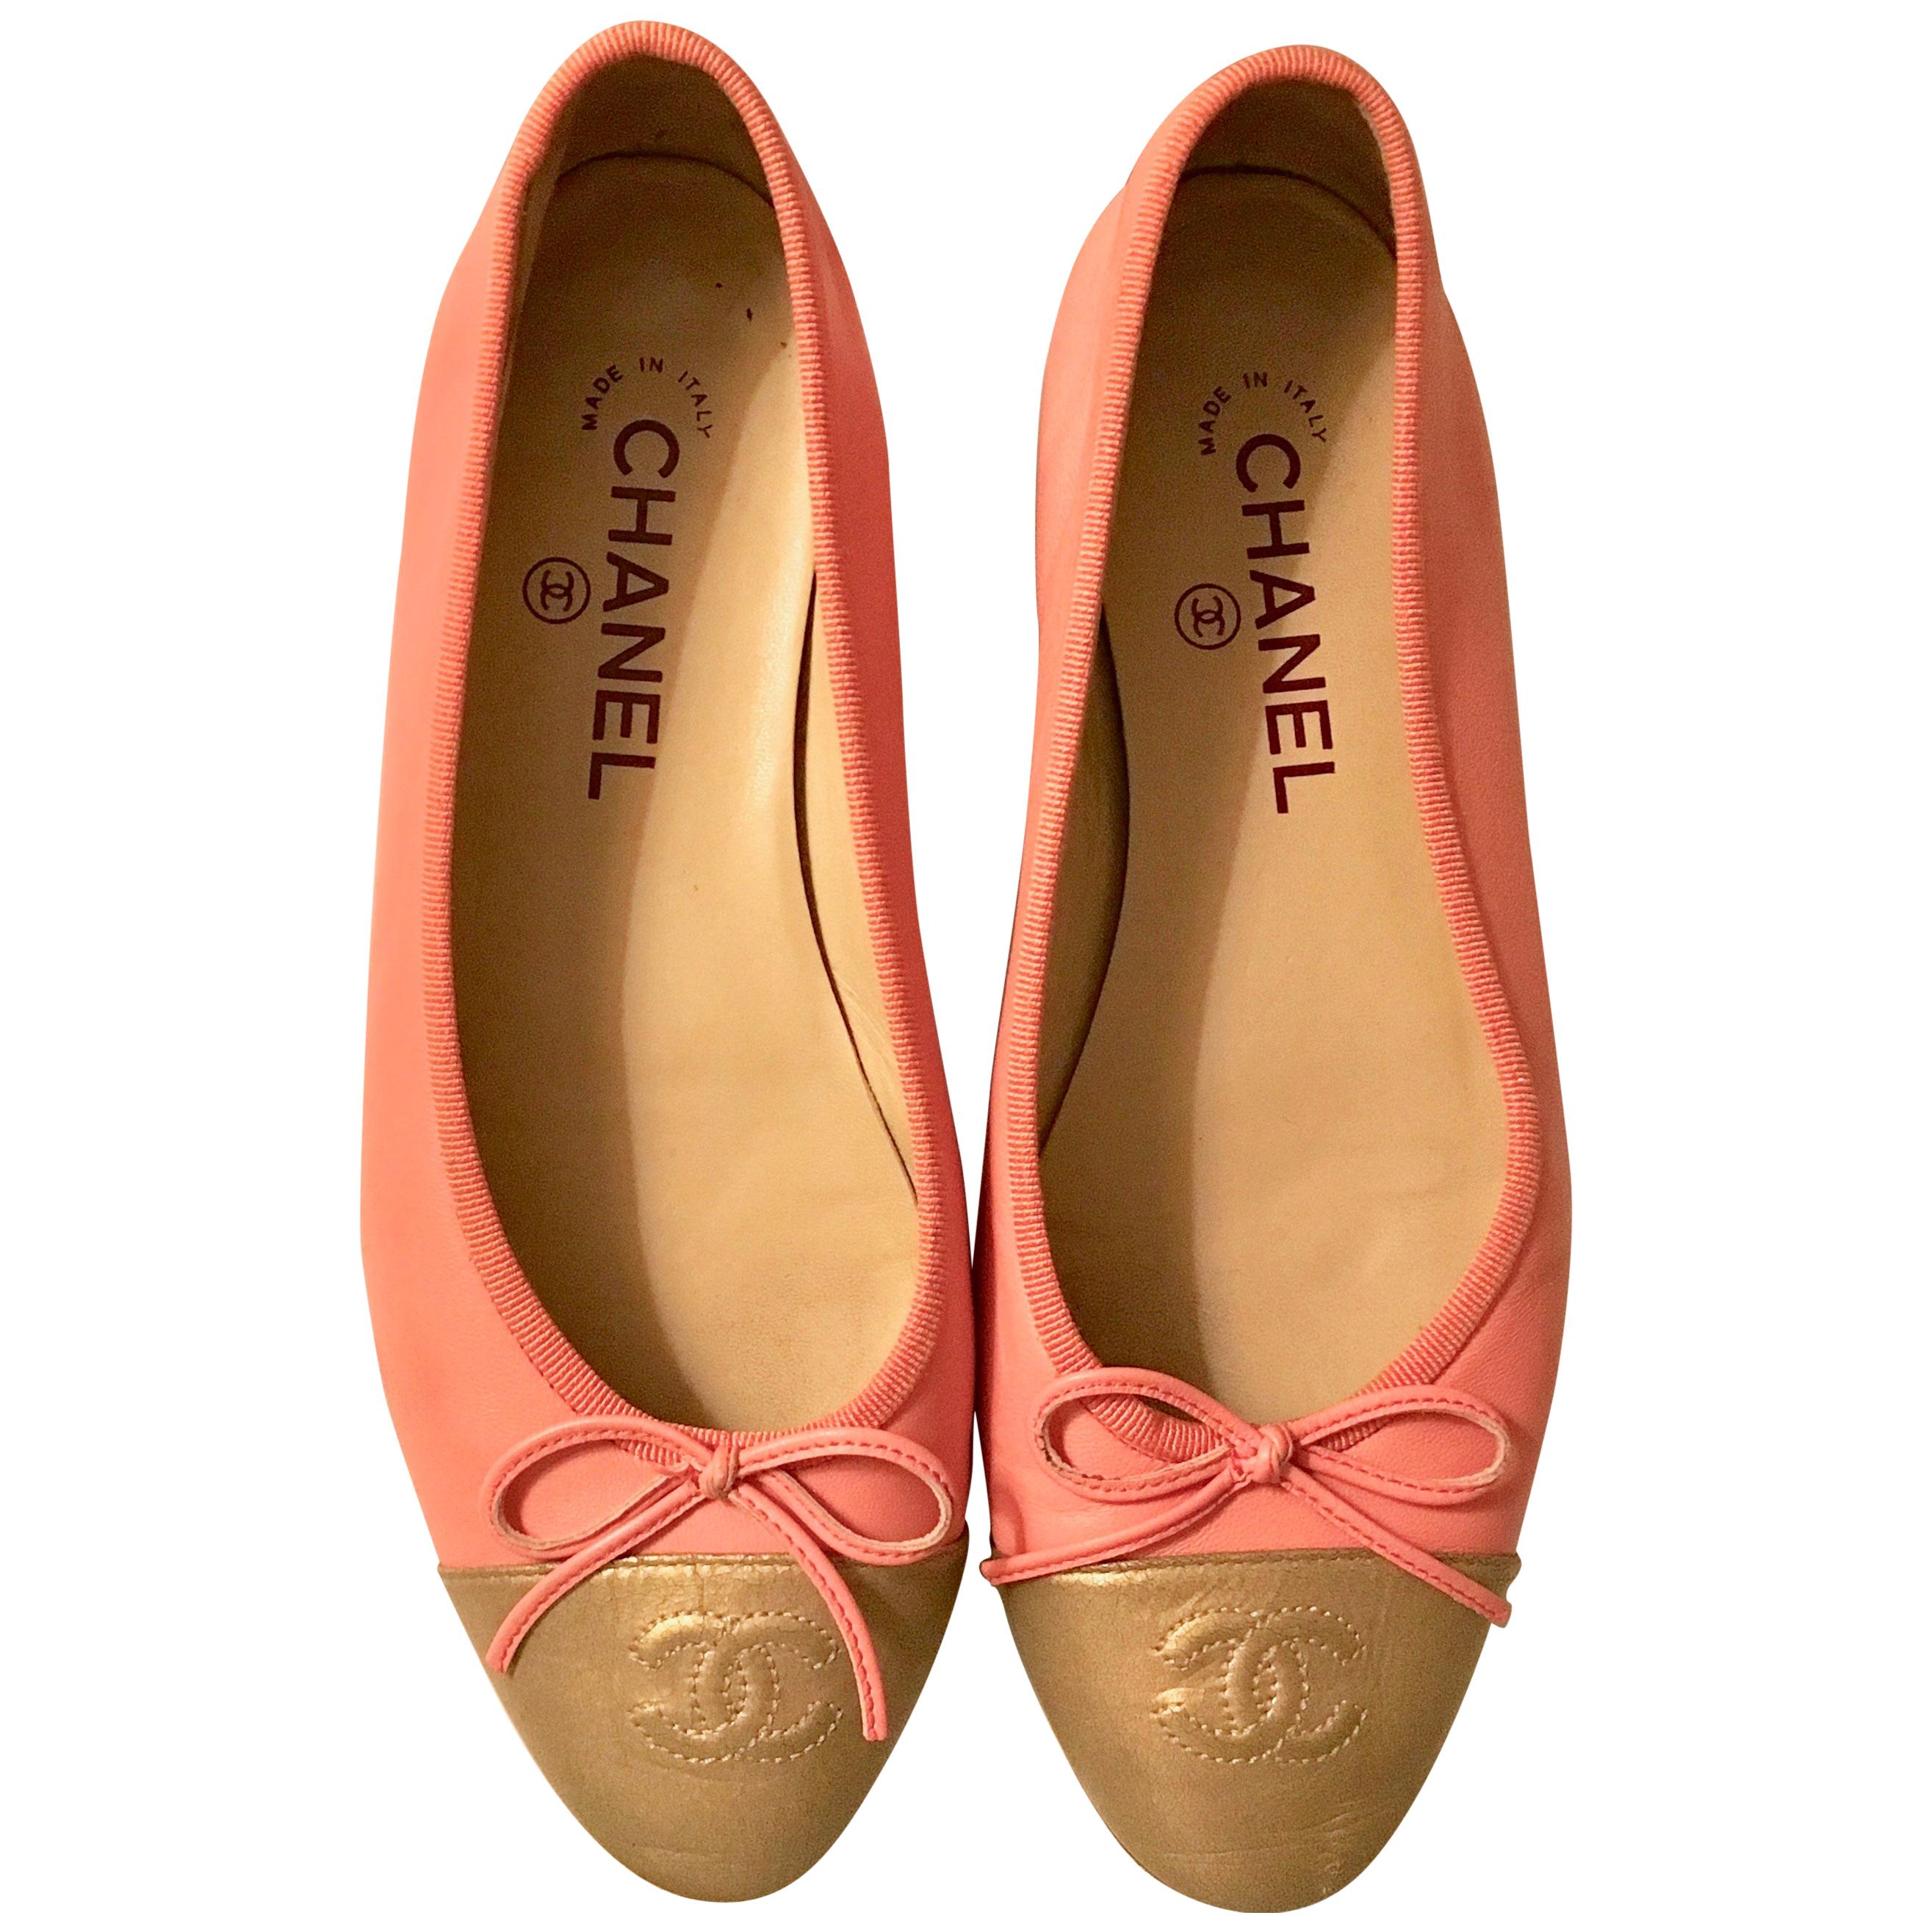 Chanel Ballerina Flats - Size 37.5  For Sale